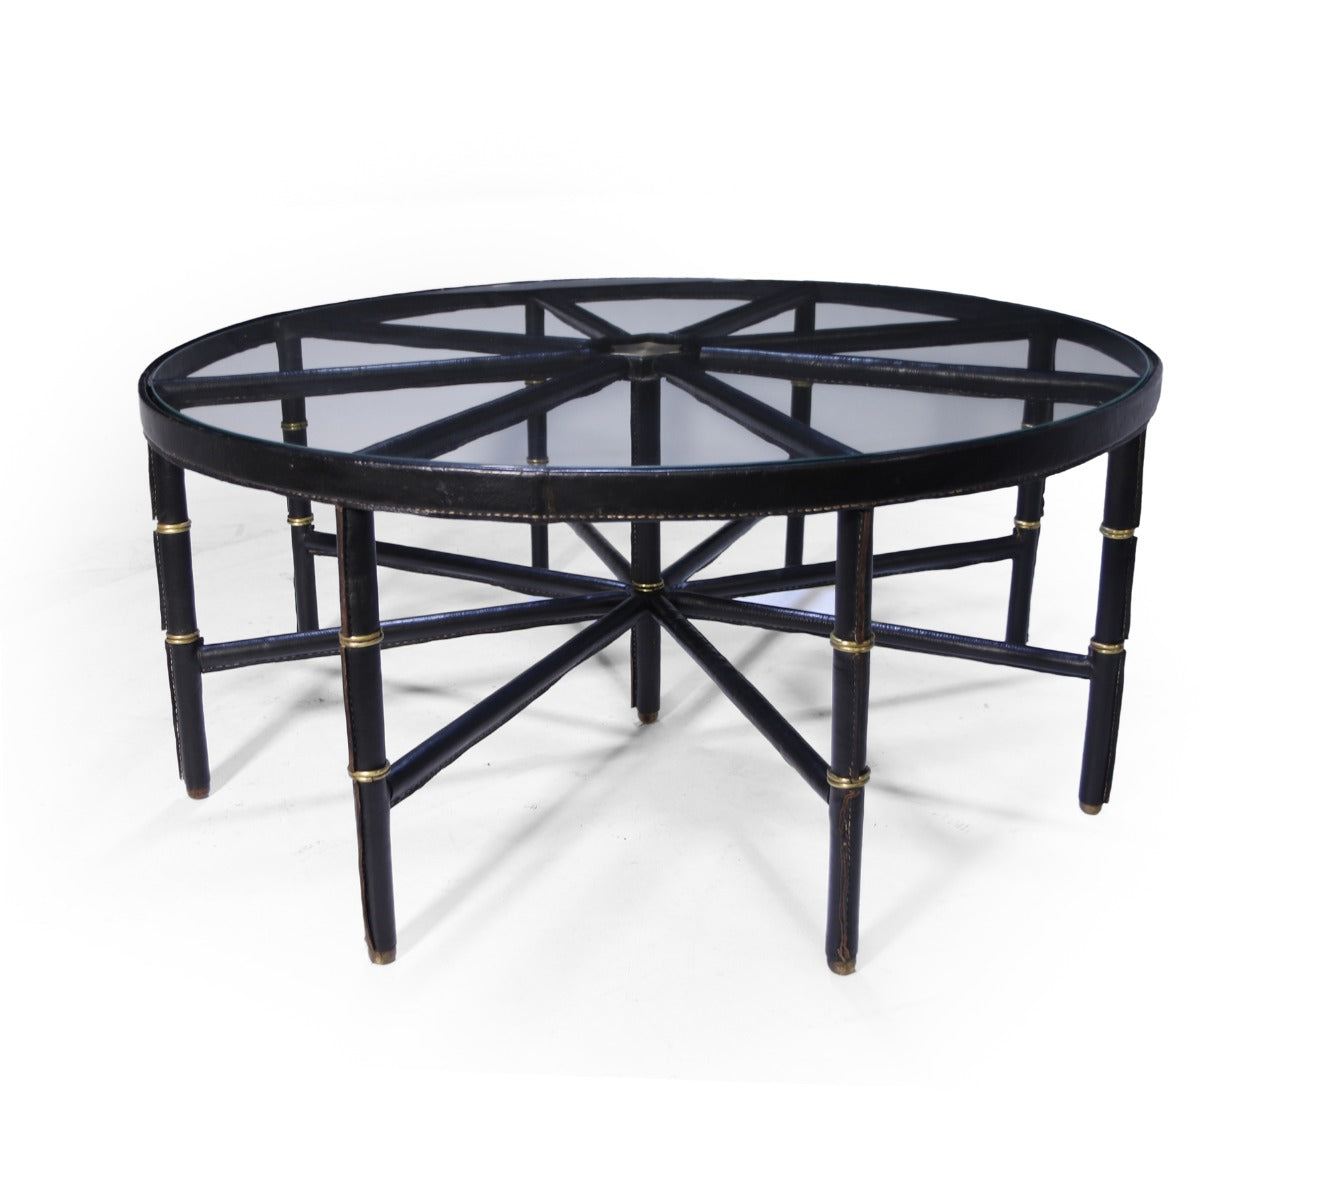  Table by Jacques Adnet